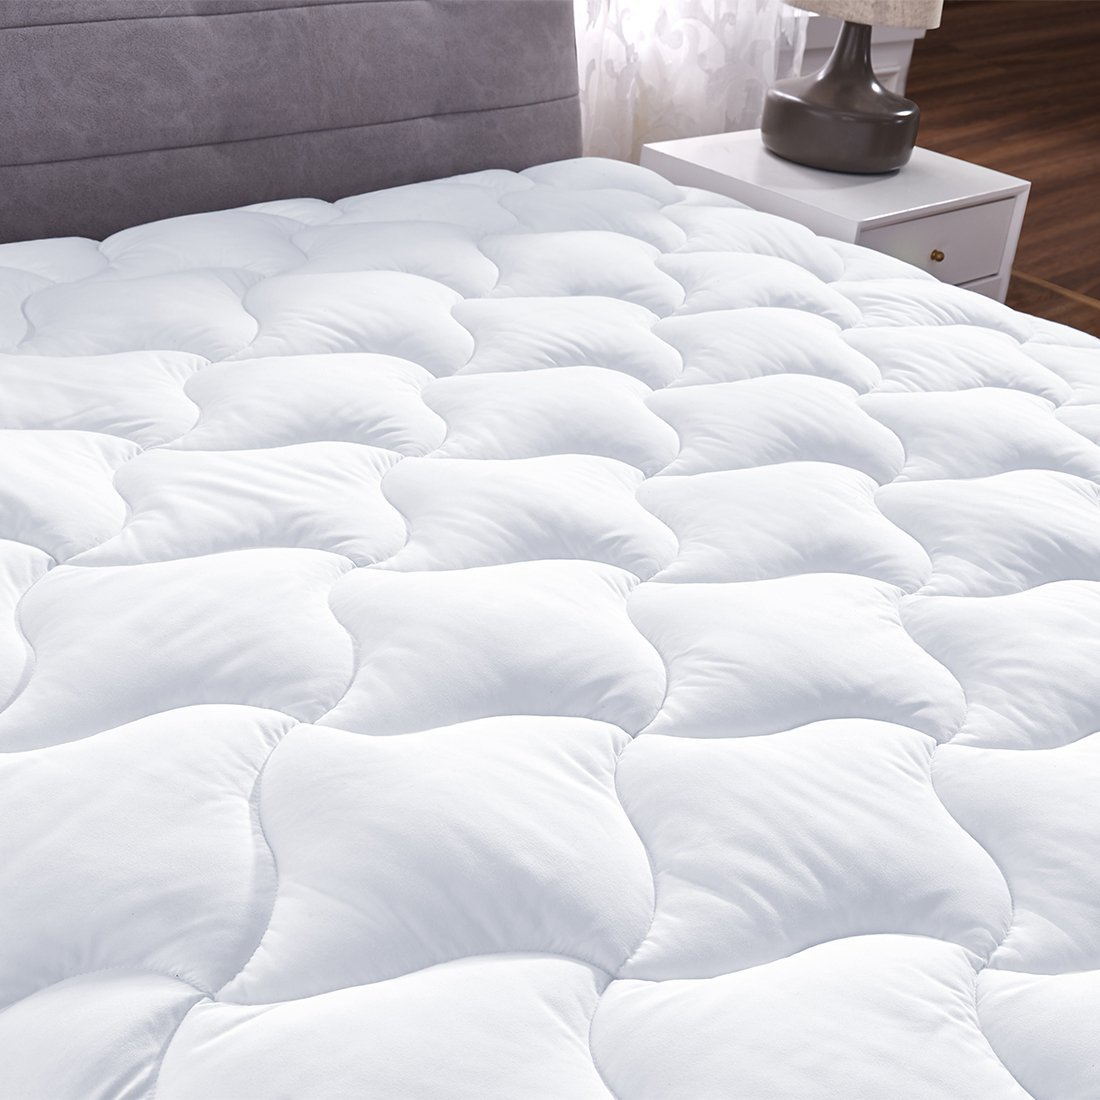 Queen Size Mattress Pad Cover Only $11.97!